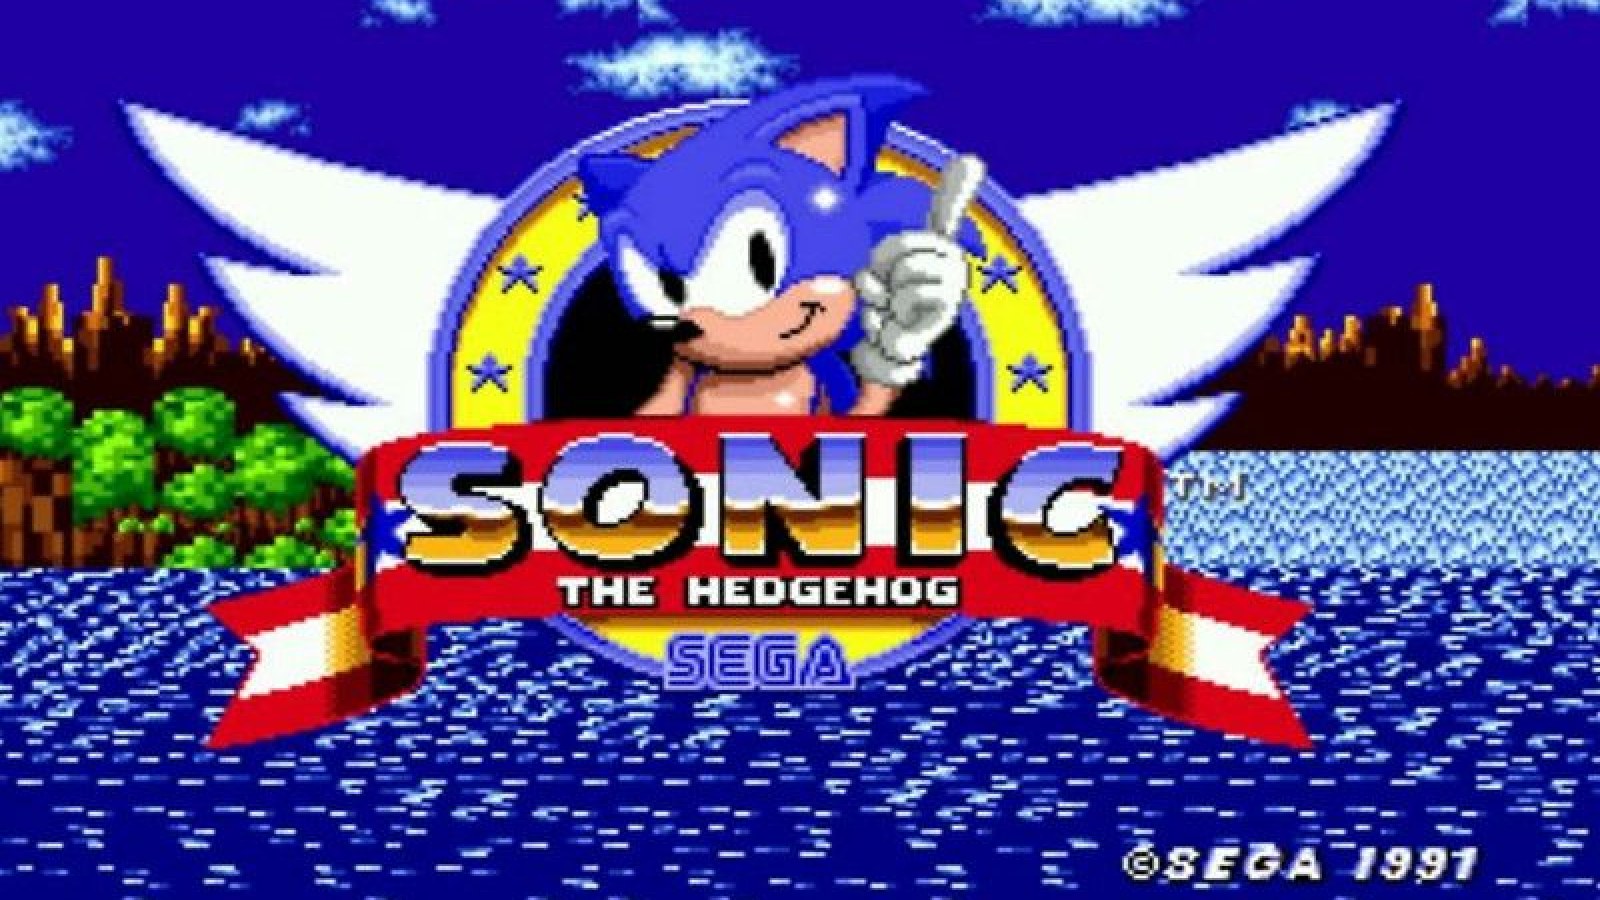 How Sonic The Hedgehog Was Directly Inspired By Bill Clinton and